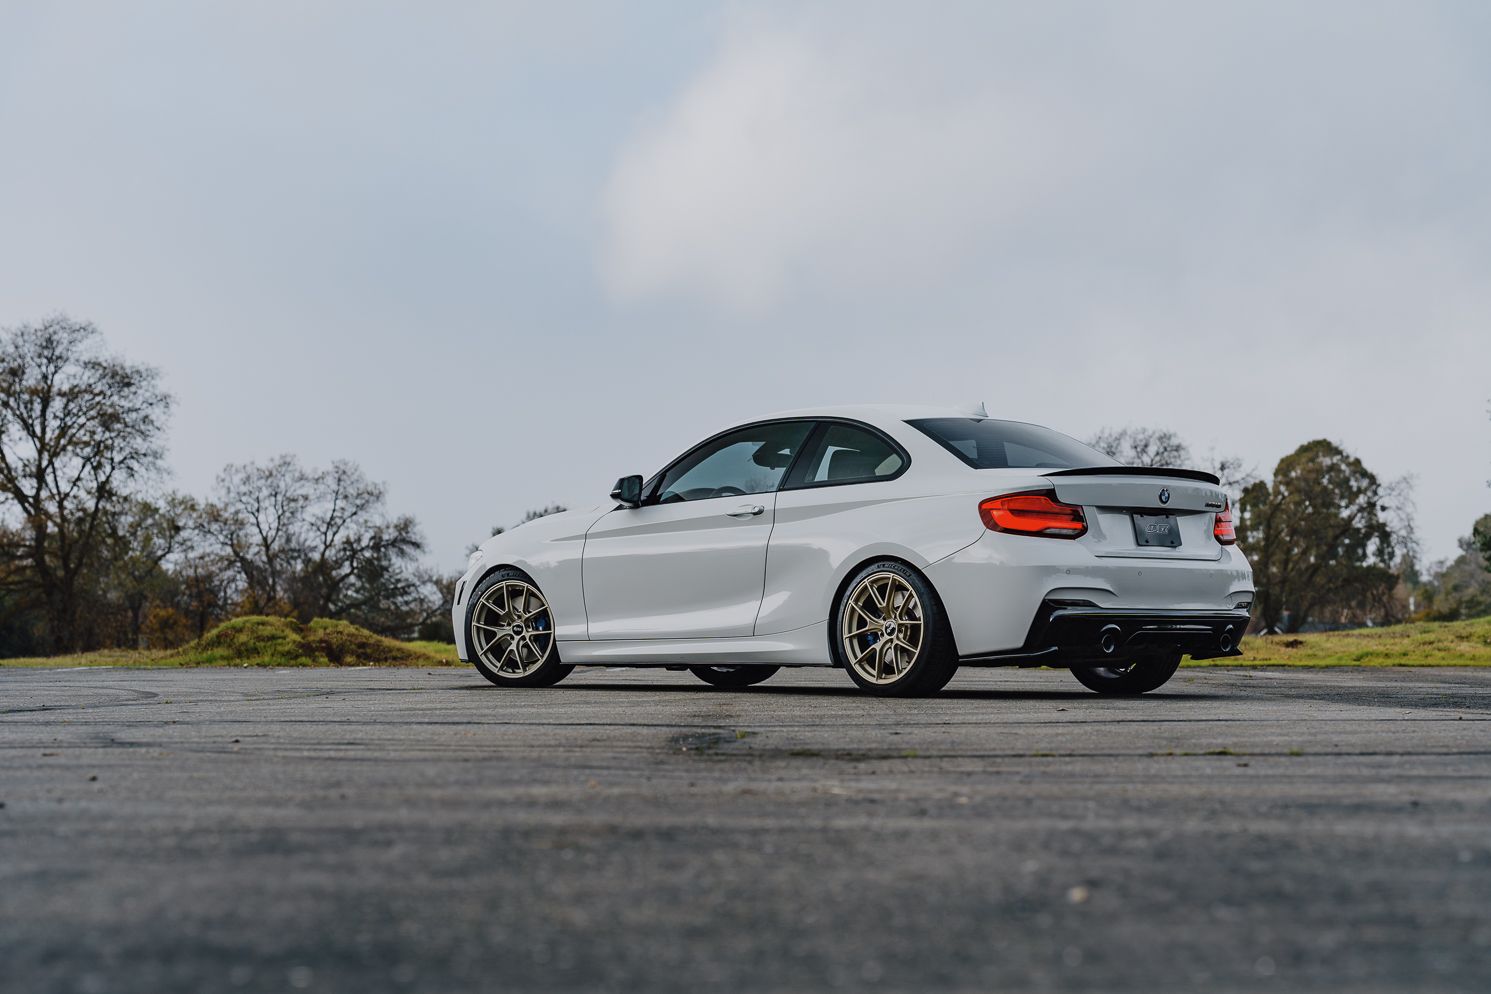 BMW F22 Coupe 2 Series with 18" VS-5RS in Motorsport Gold